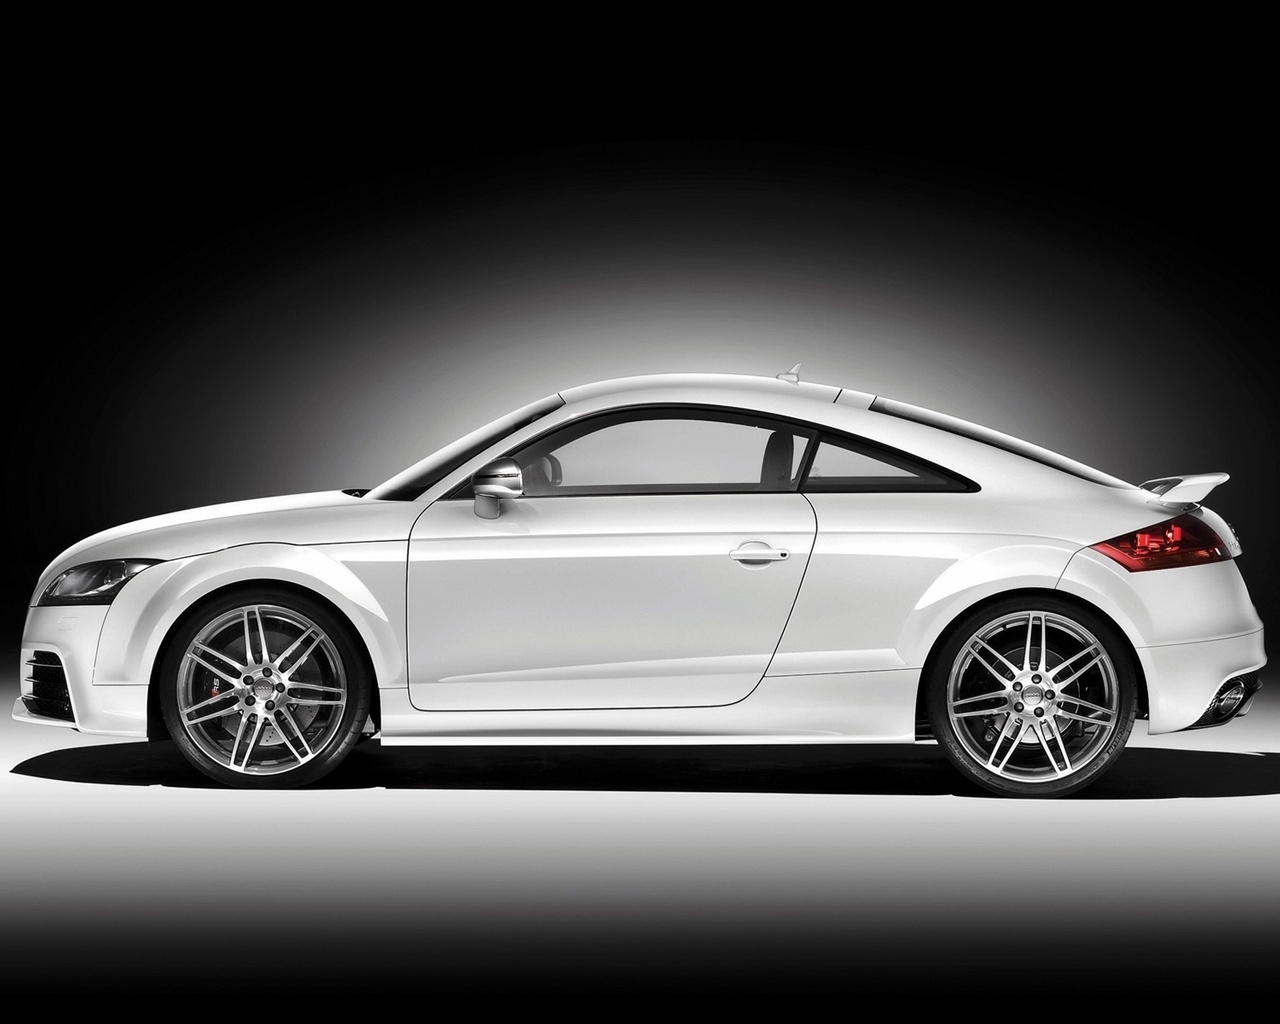 2009 Audi TT RS Coupe Studio Side for 1280 x 1024 resolution